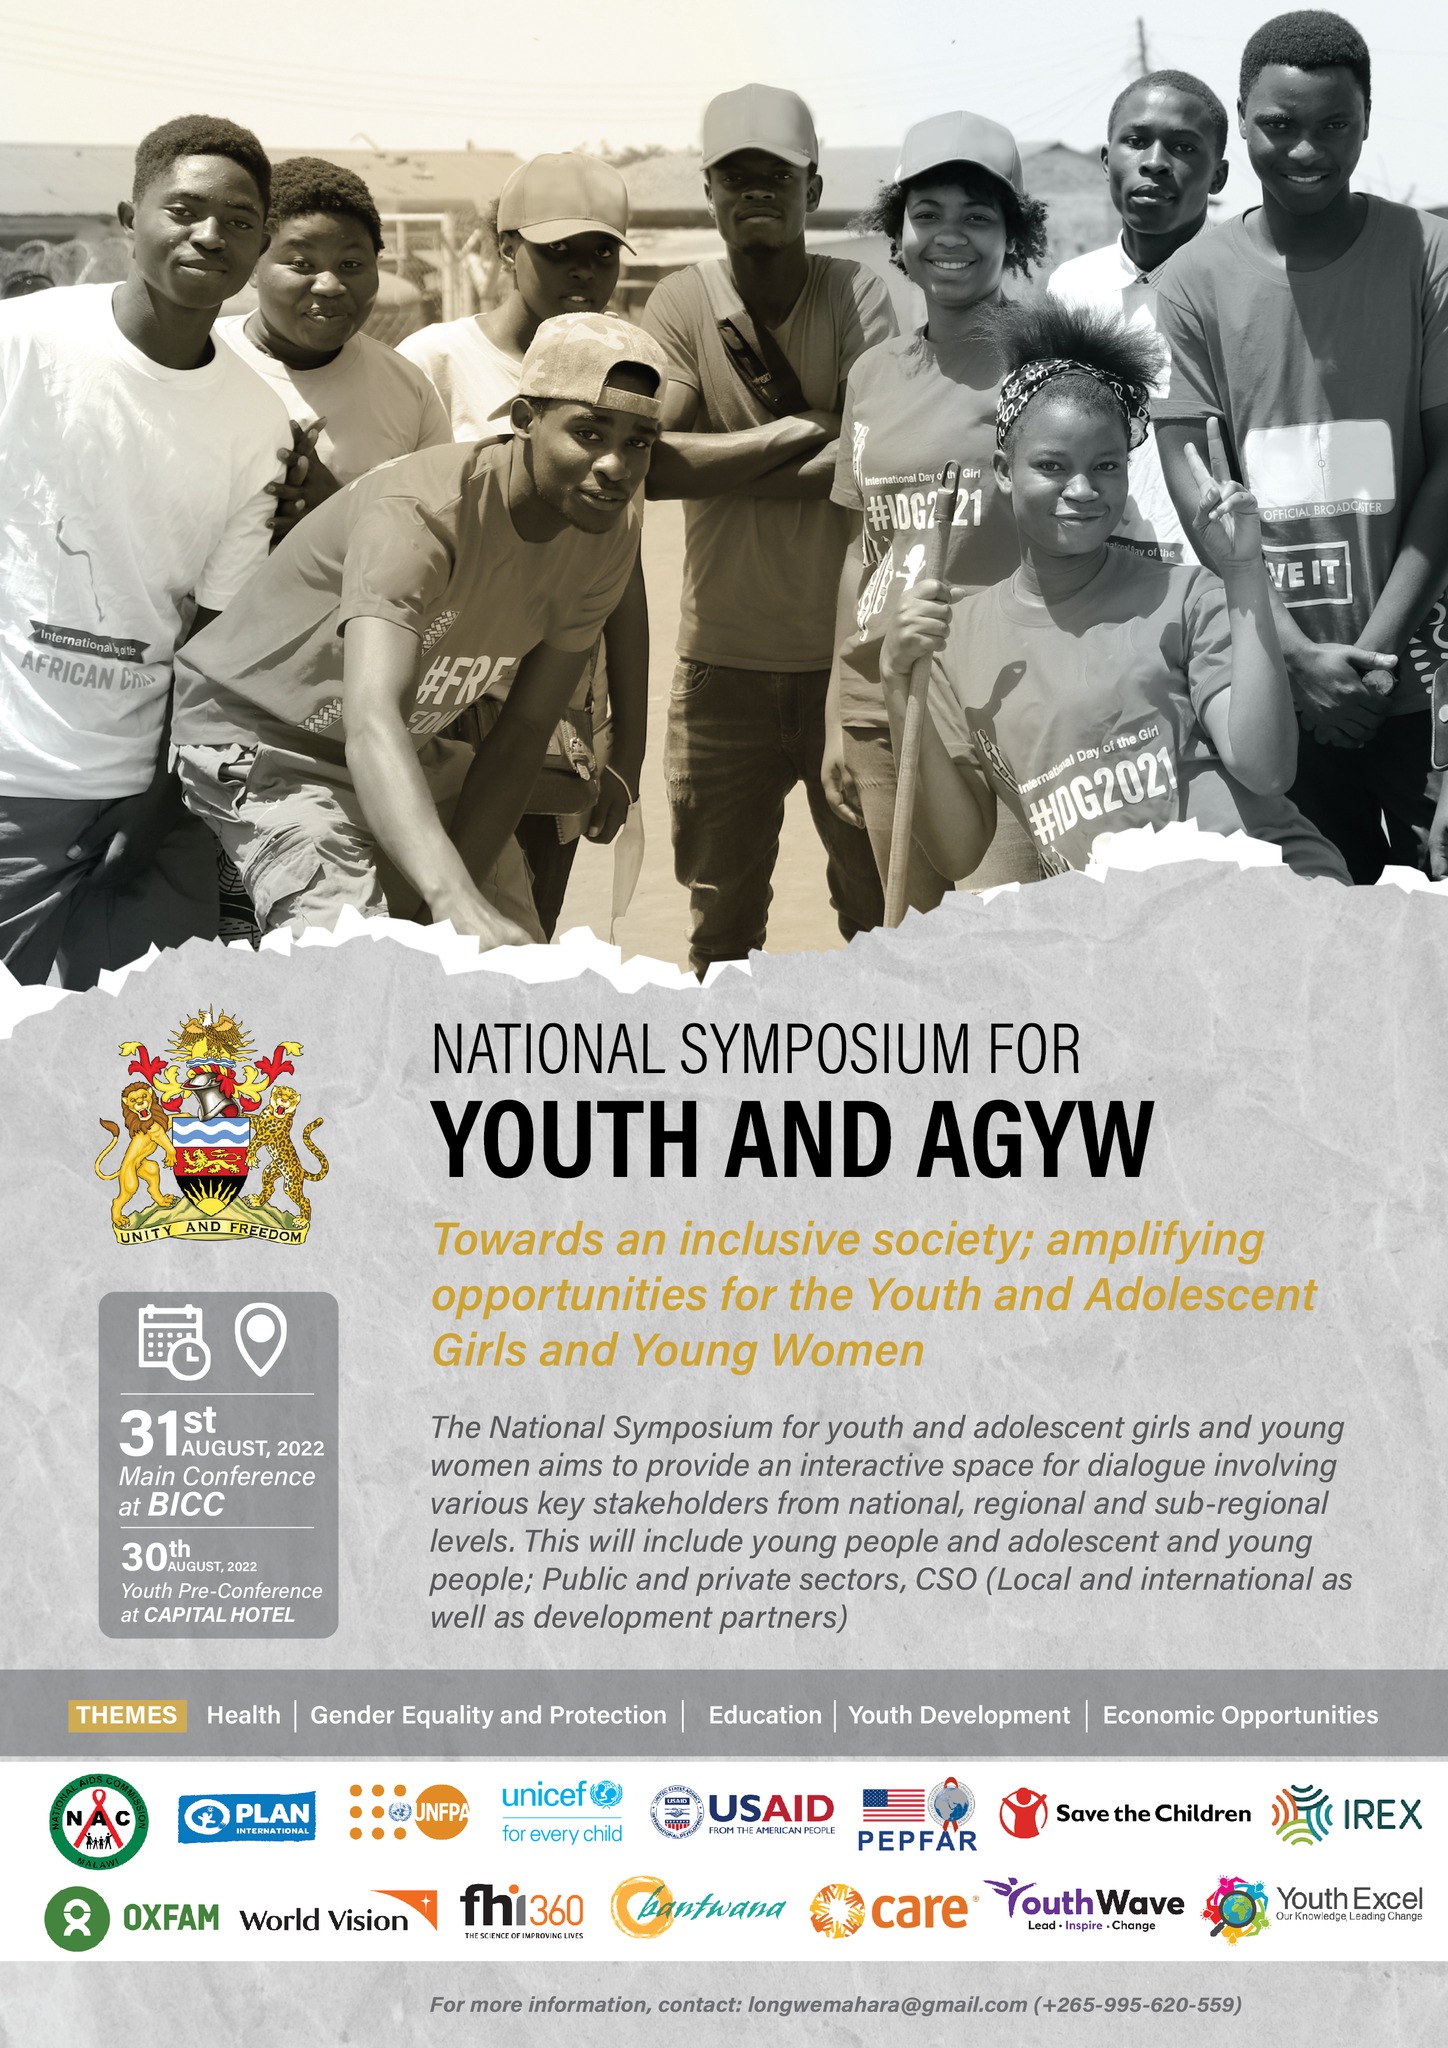 National symposium for youth and AGYW